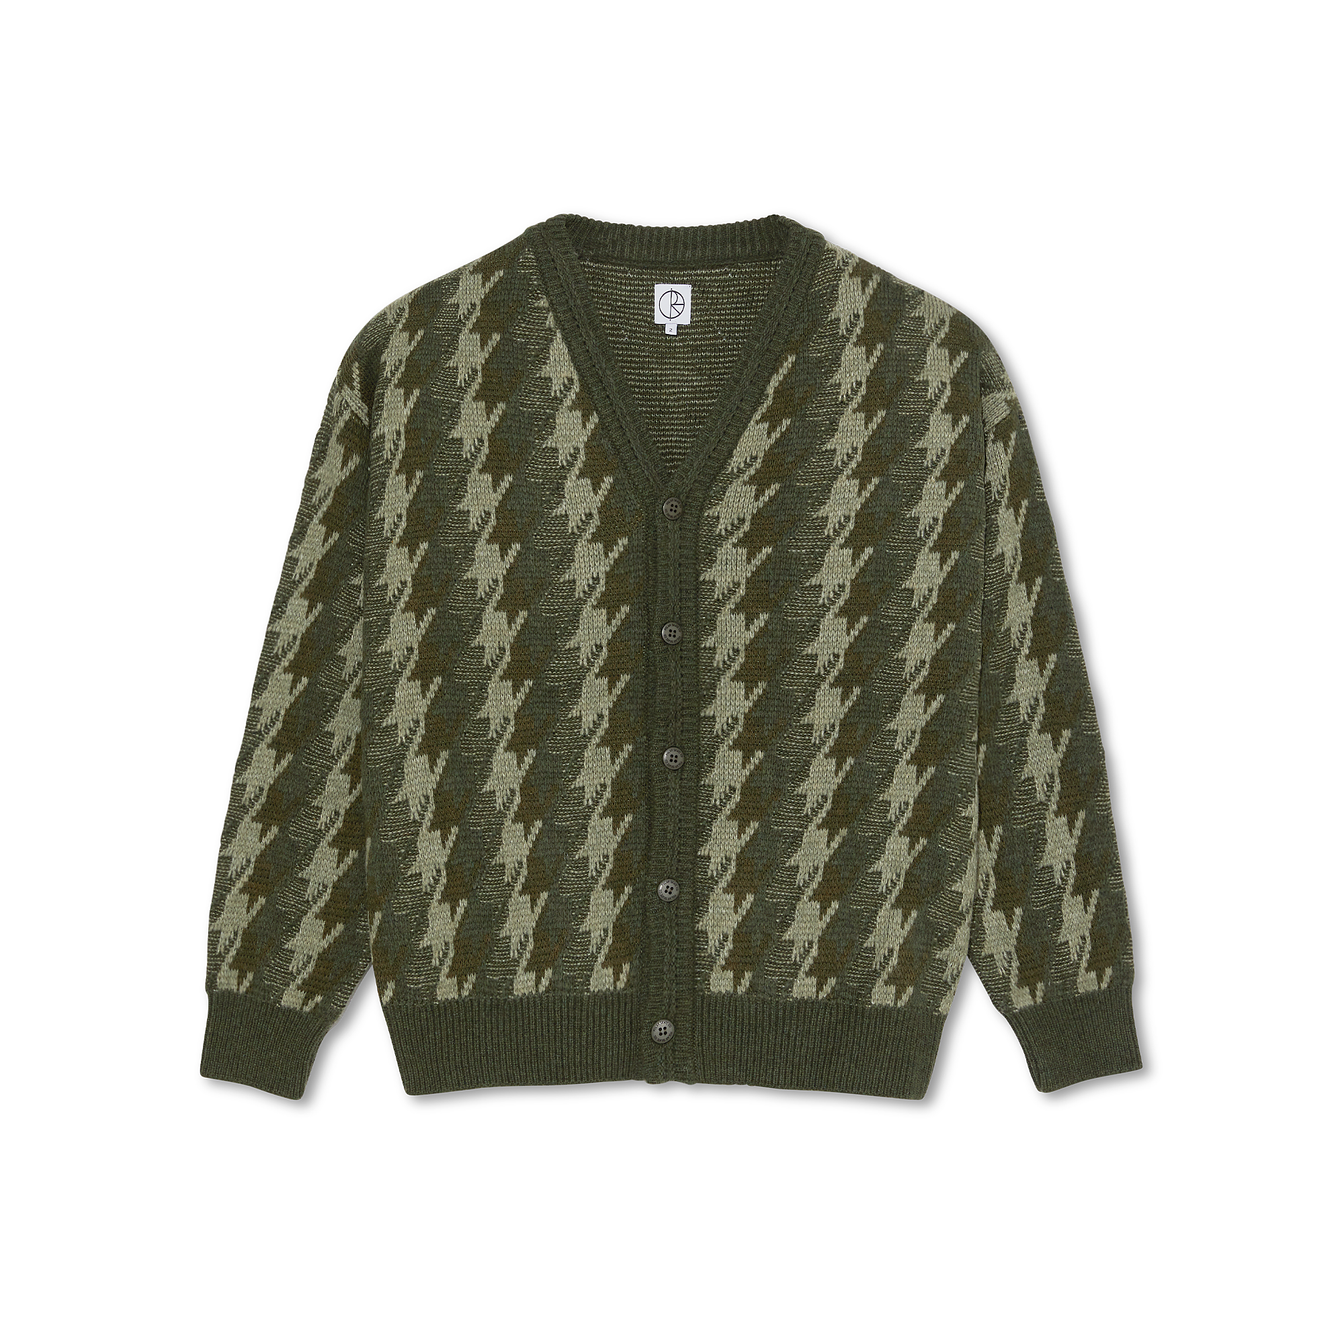 Louis Houndstooth Cardigan - Green